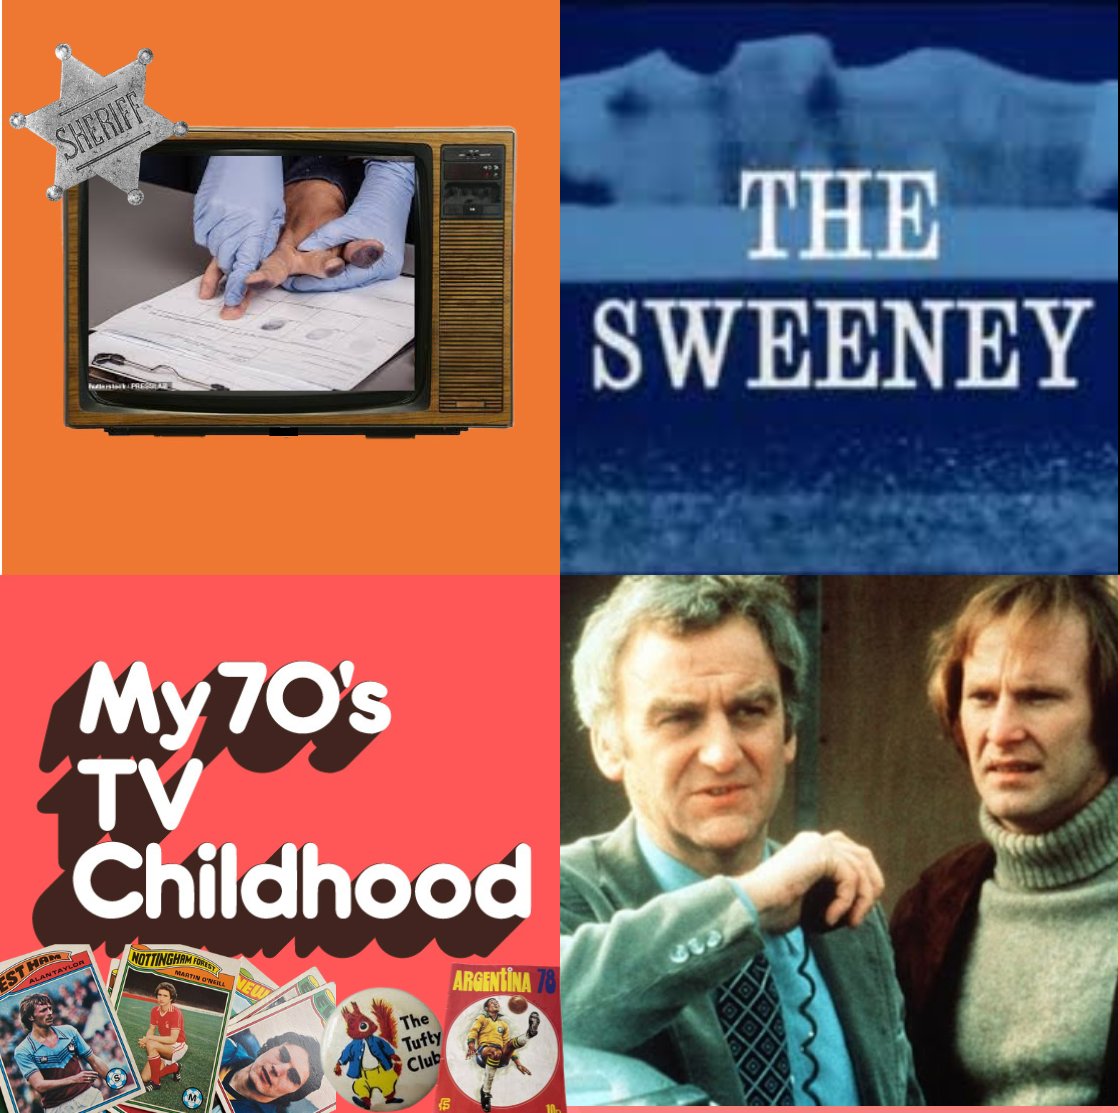 Don't miss this week's show on 'The Sweeney'! Join us as we explore the iconic 1970s police drama, featuring Jack Regan and George Carter. From intense car chases to gritty storytelling, it's a trip down memory lane you won't want to miss! #TheSweeney #1970sTV 📺🚓